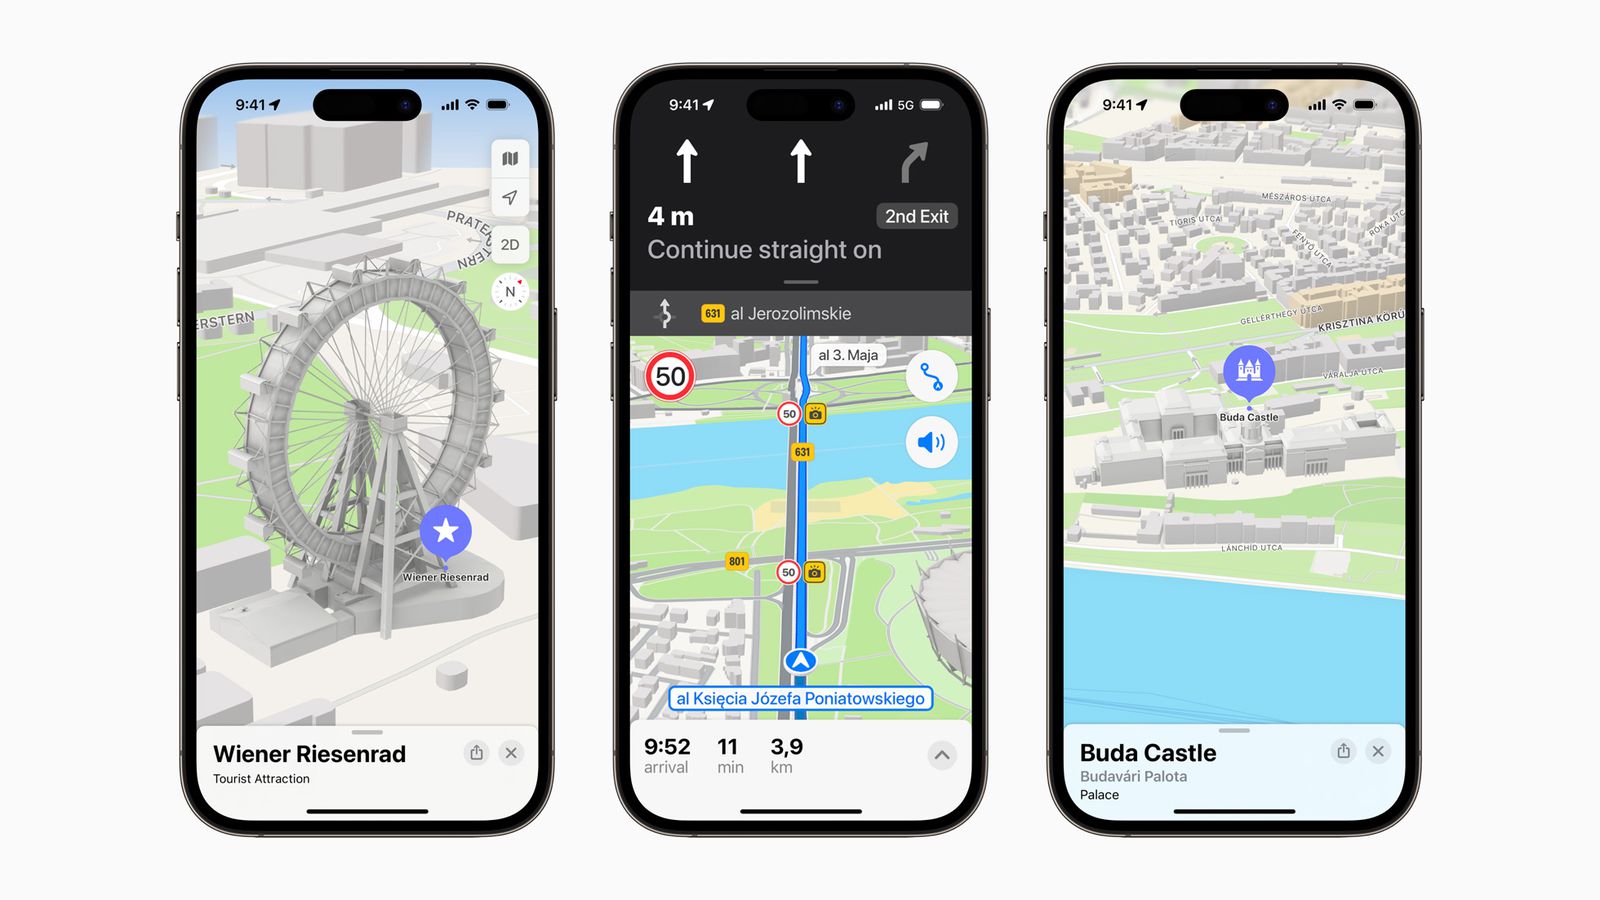 Latest Apple Maps Aims To Enhance Your Driving Experience With New and Innovative Features